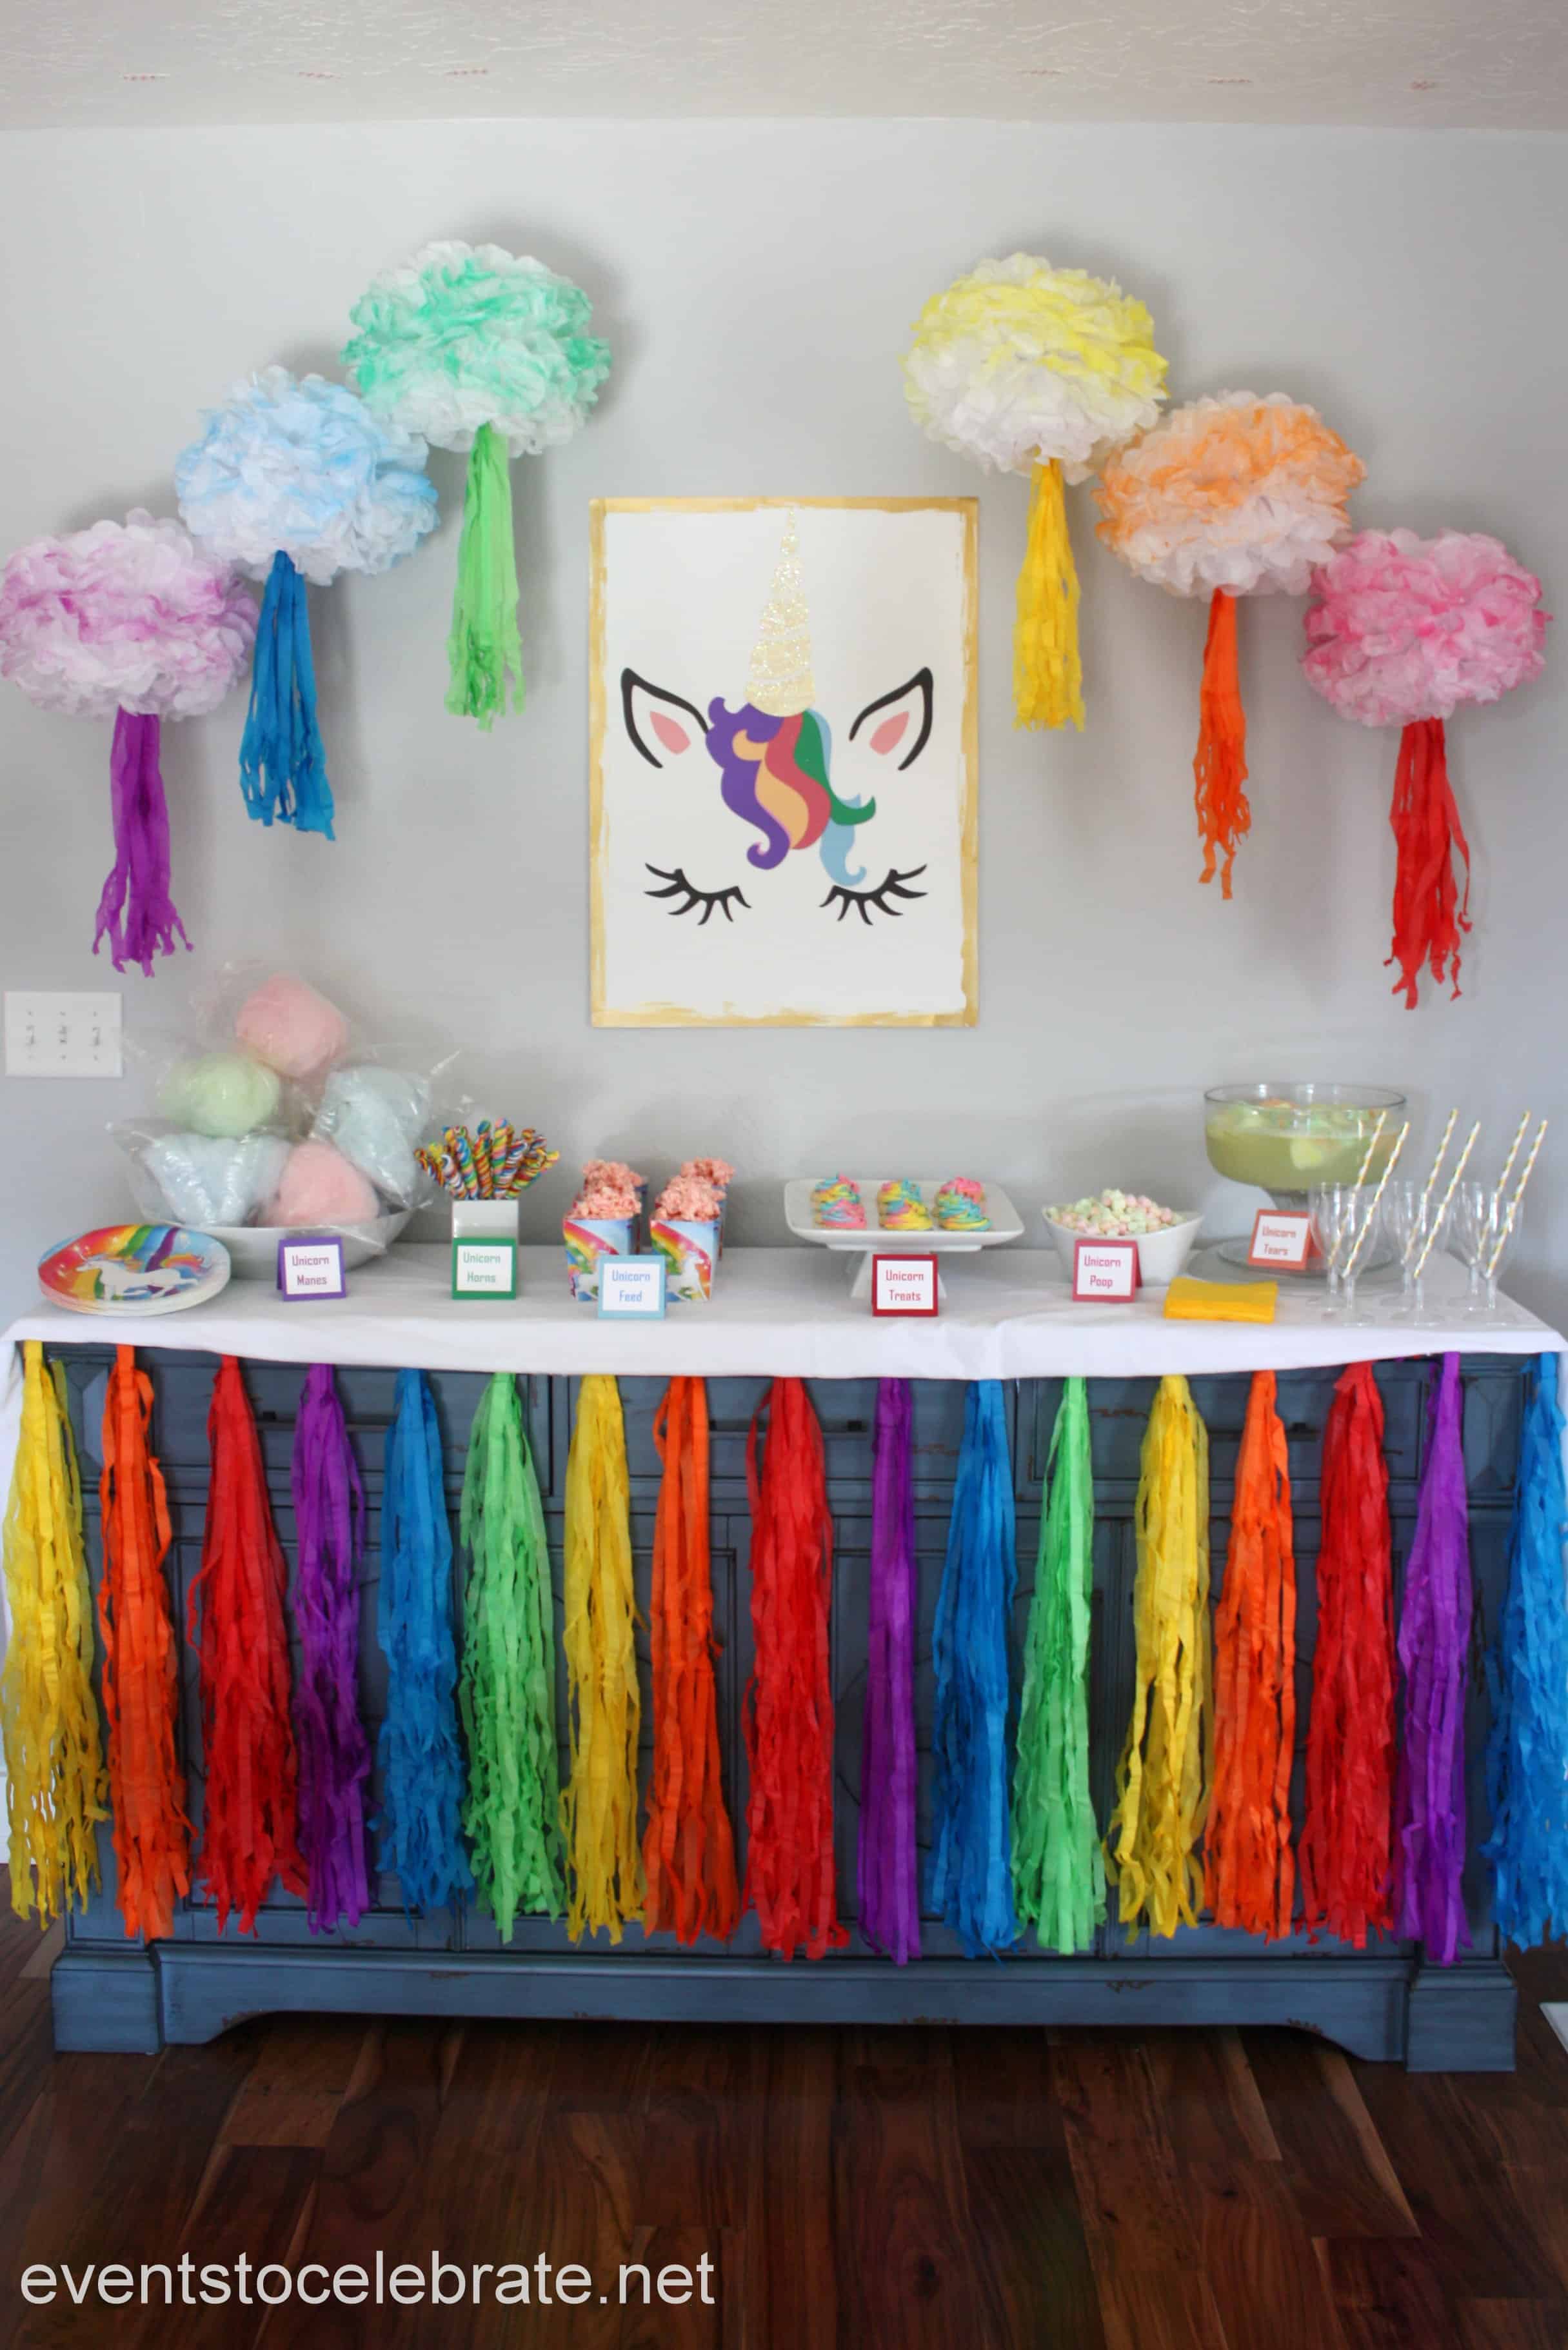 Unicorn Party - Decorations and Food - events to CELEBRATE!